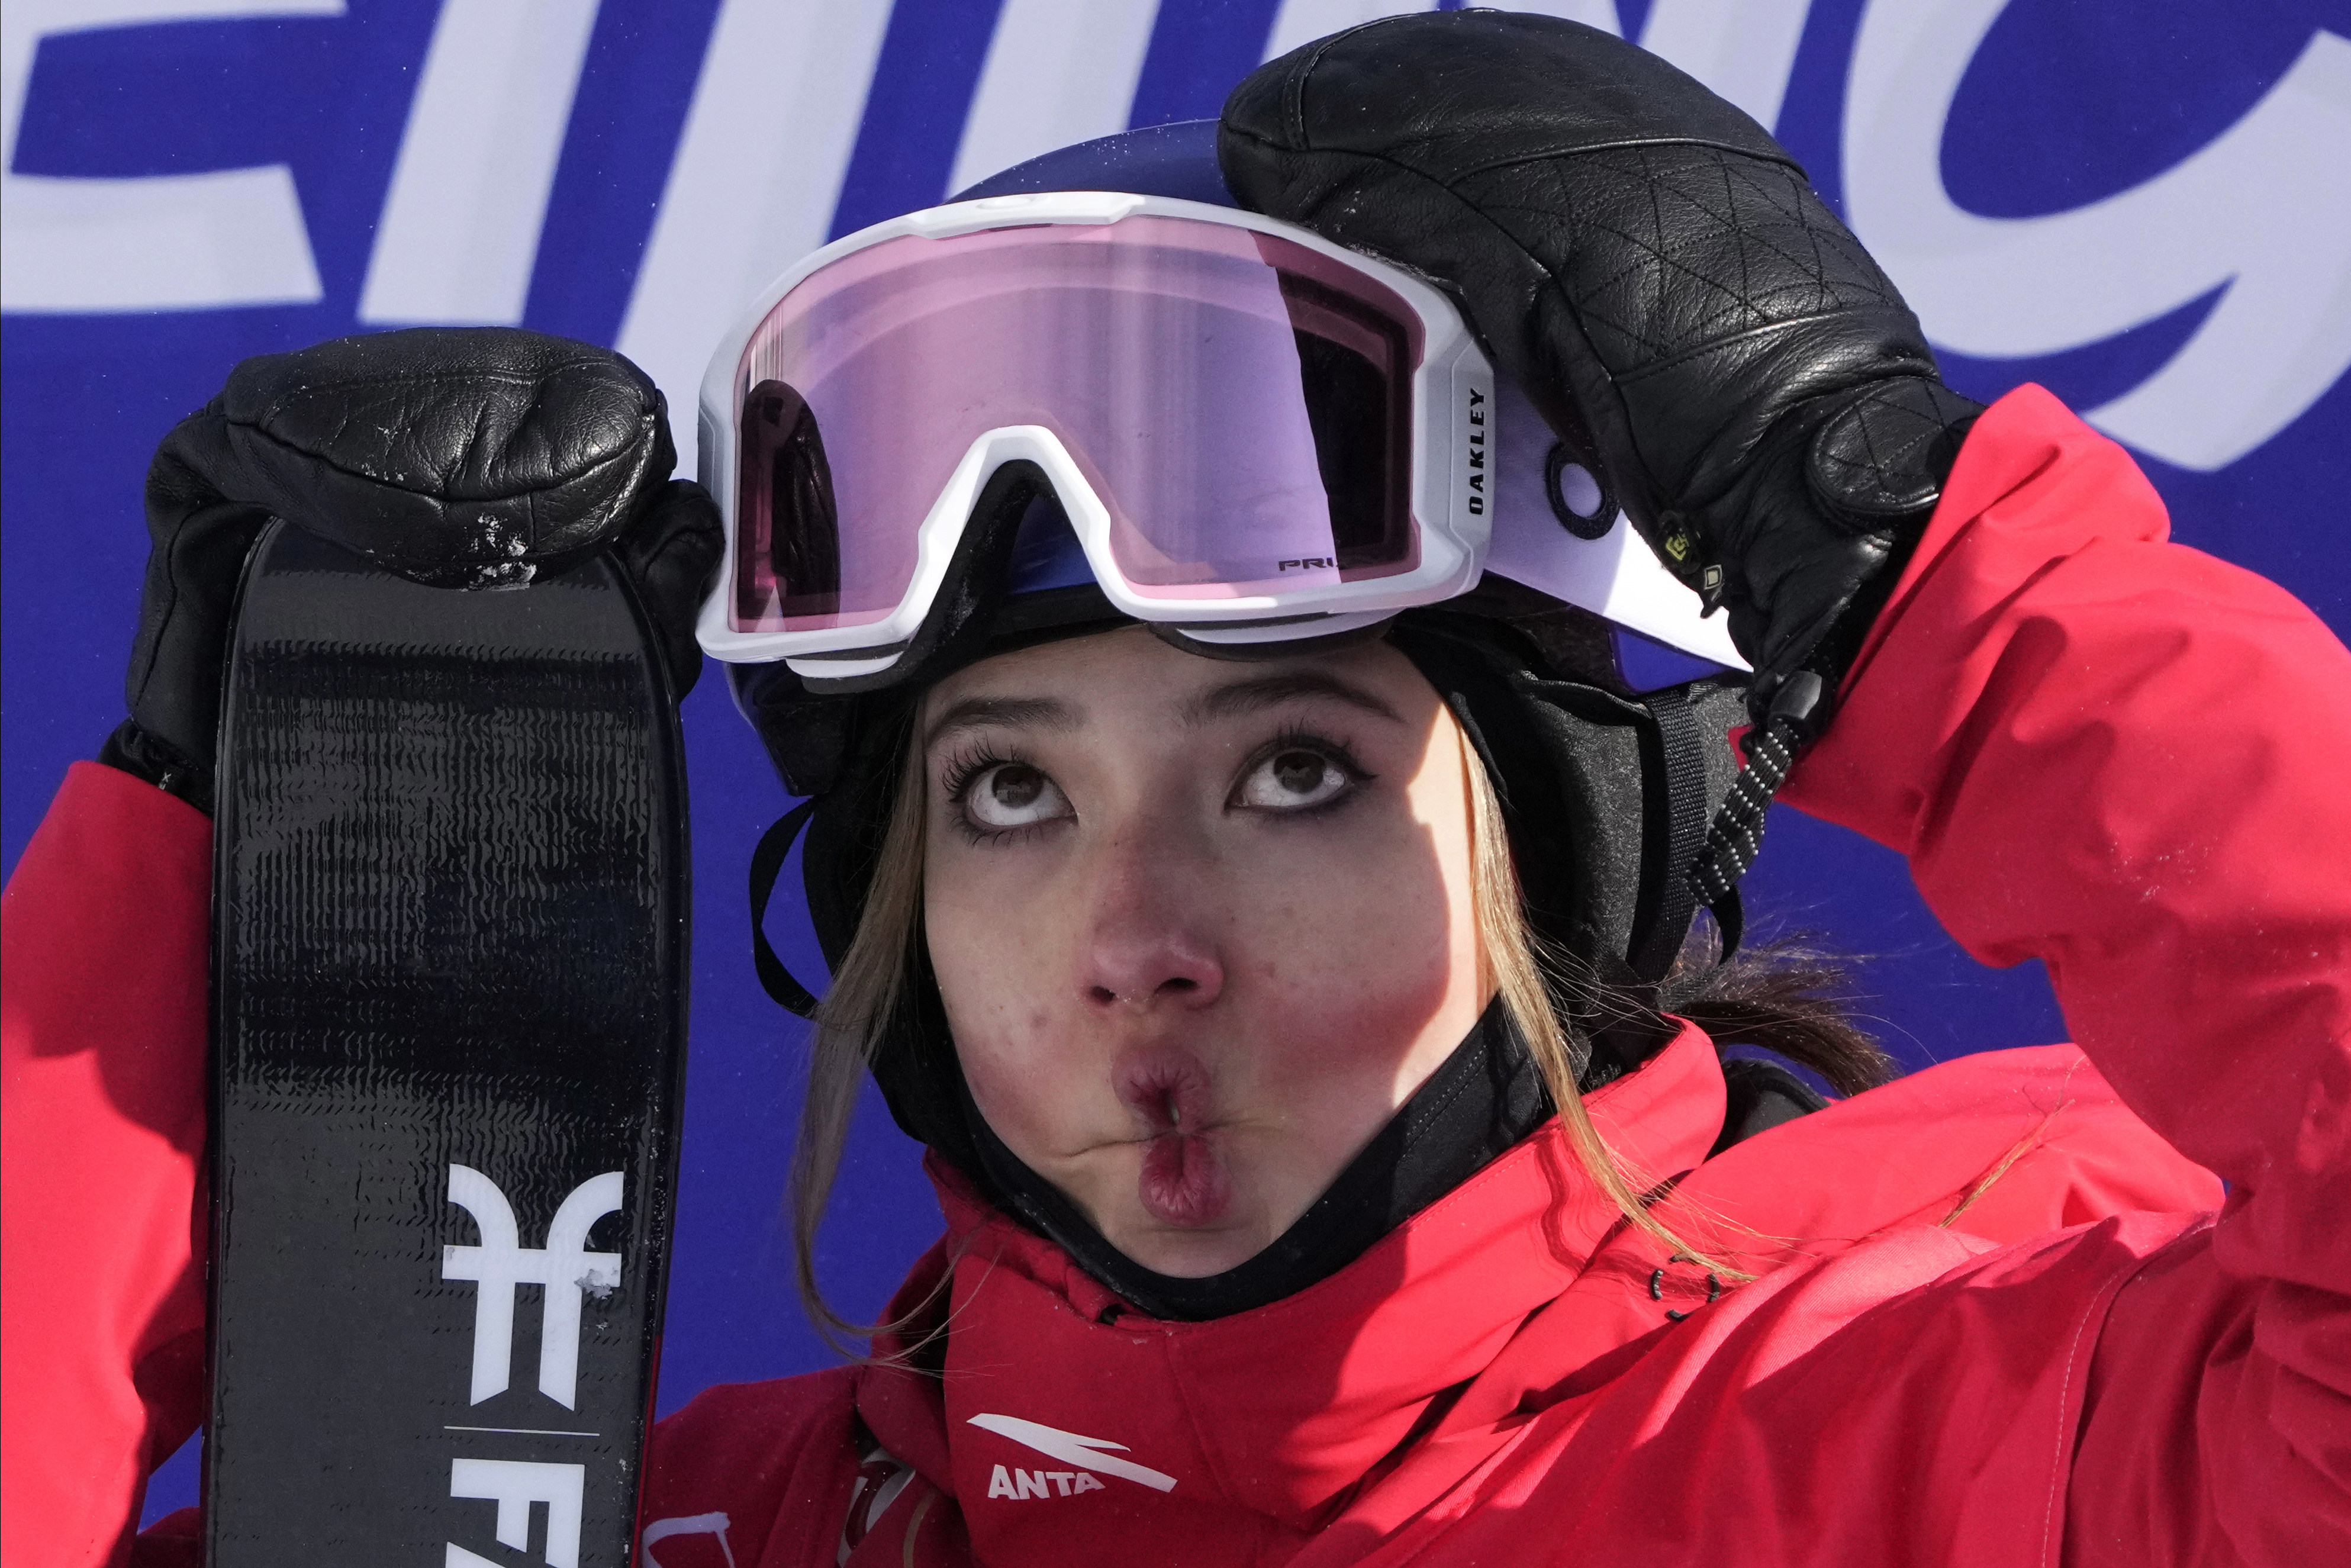 Eileen Gu reactsafter completing her run during the women’s slopestyle finals at the 2022 Beijing Winter Olympics. Photo: AP